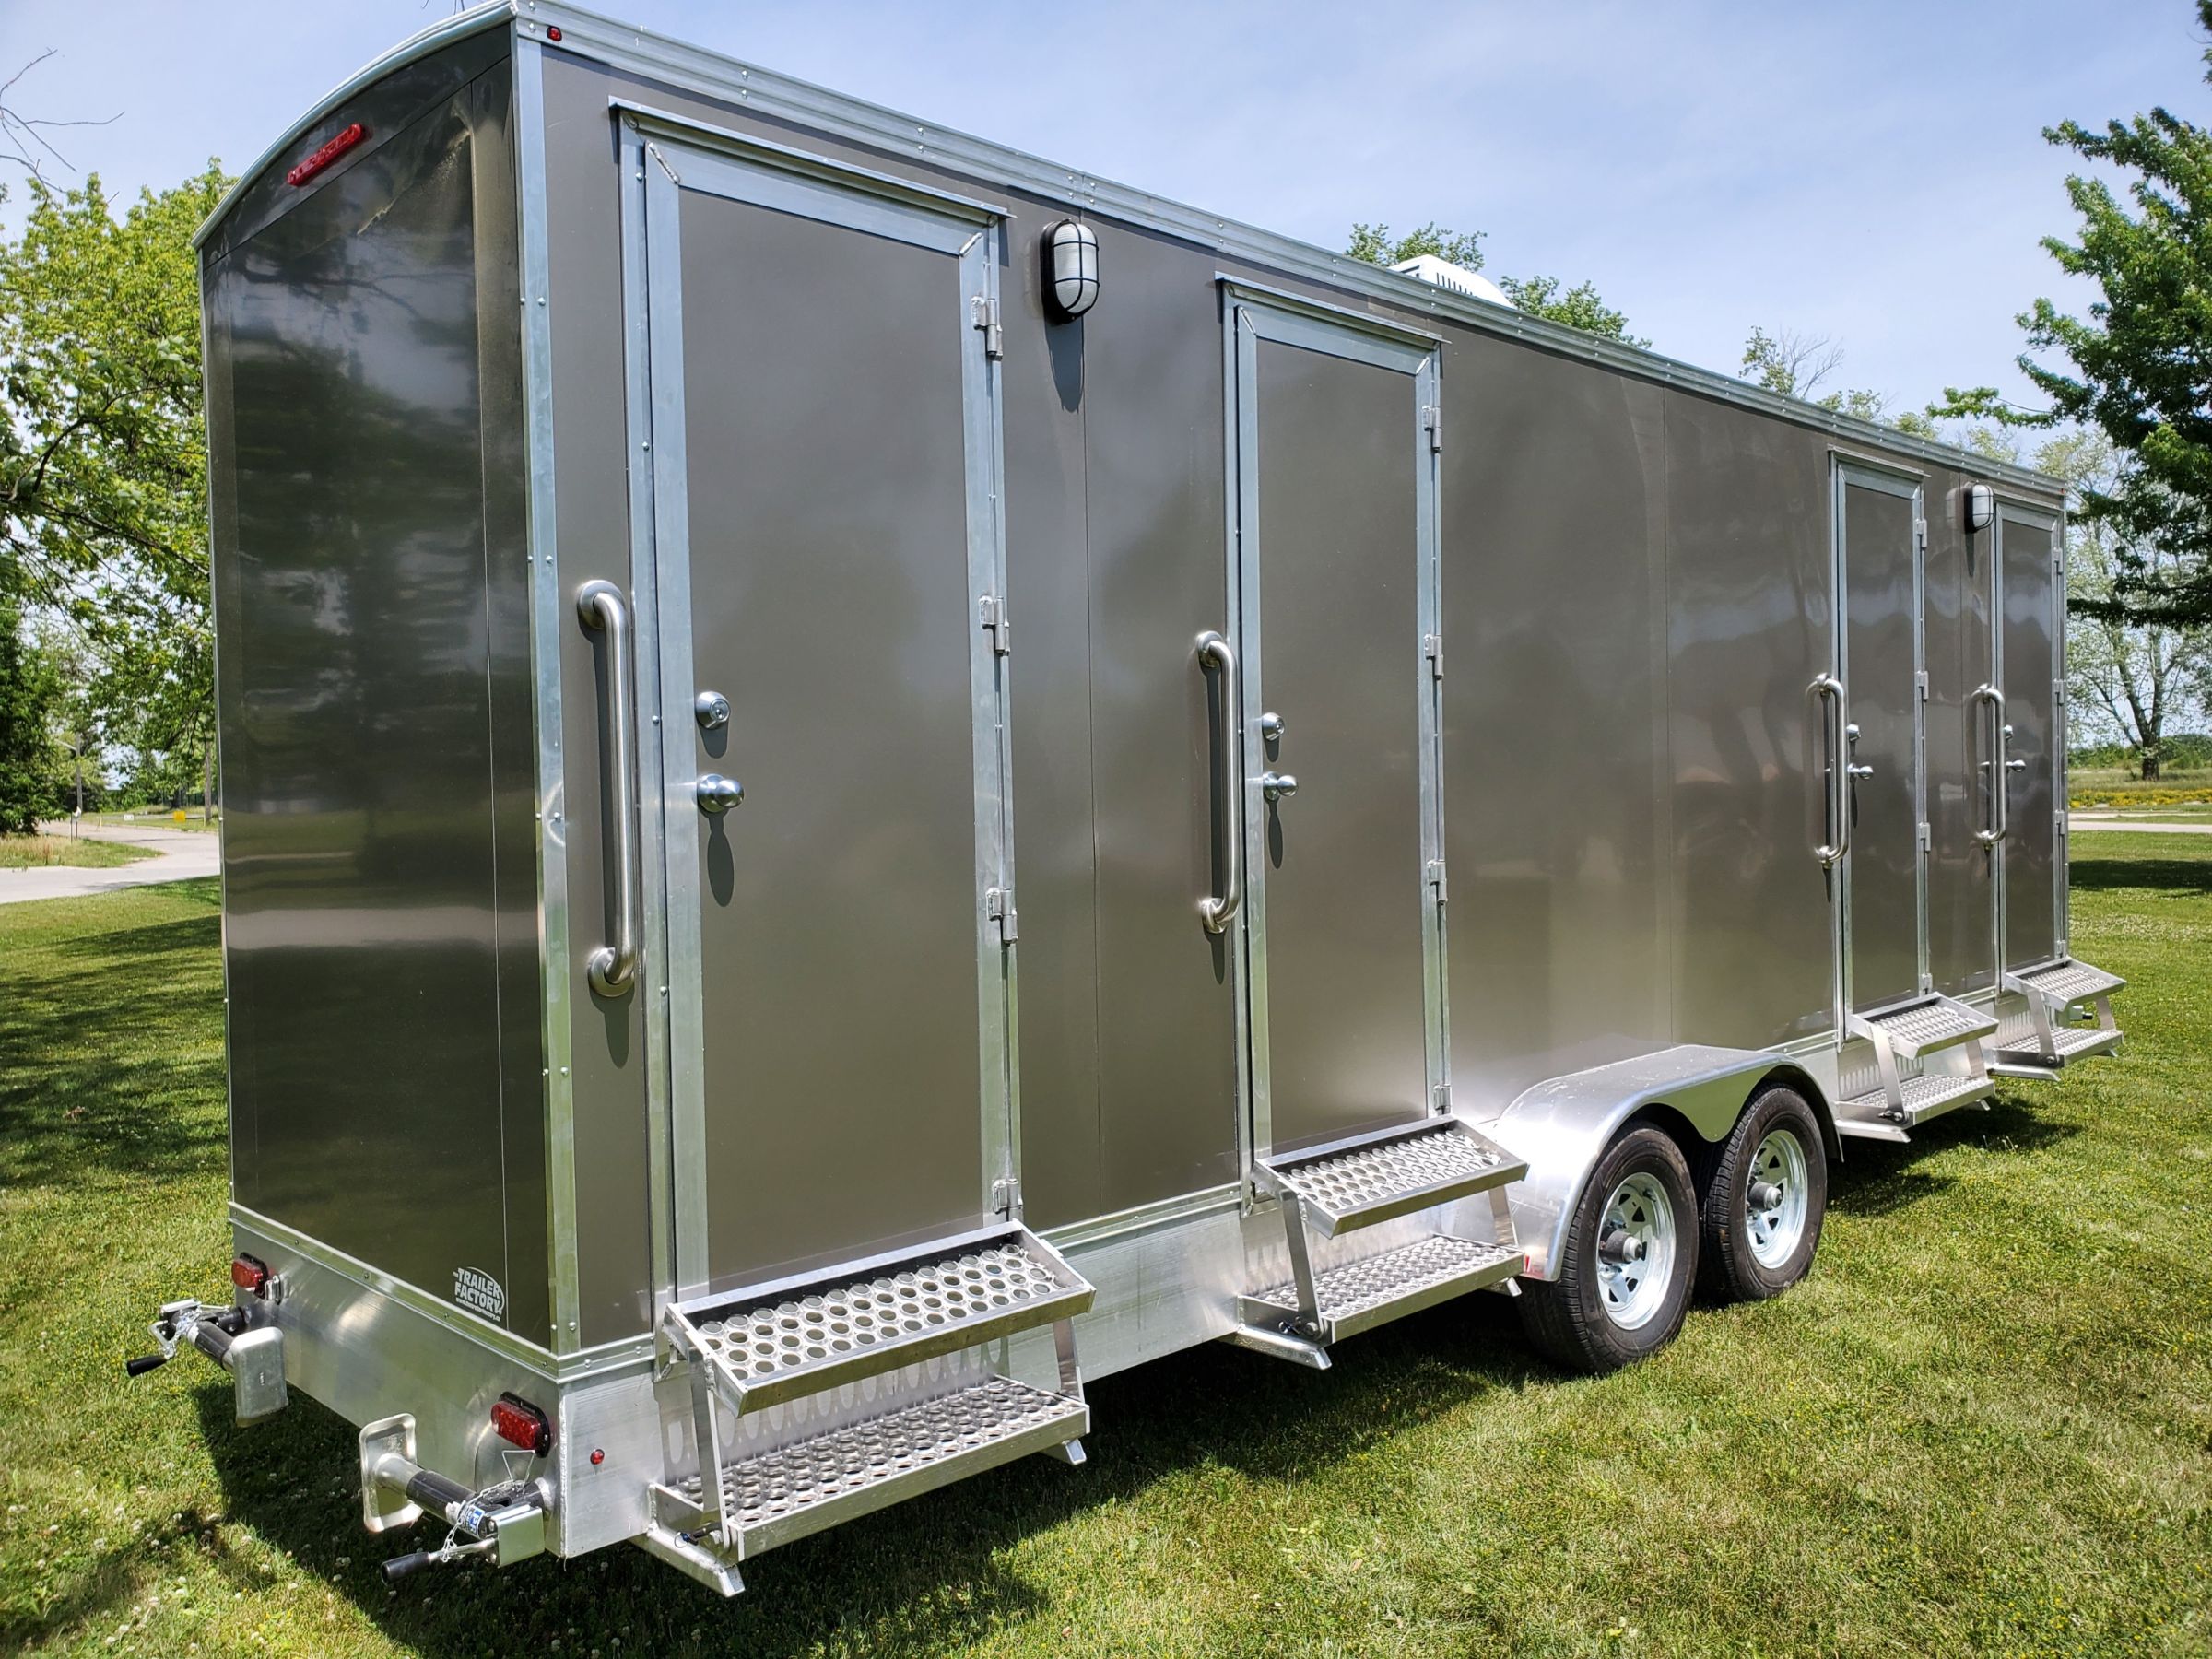 Hosting the Perfect Party with the Right Washroom Trailer